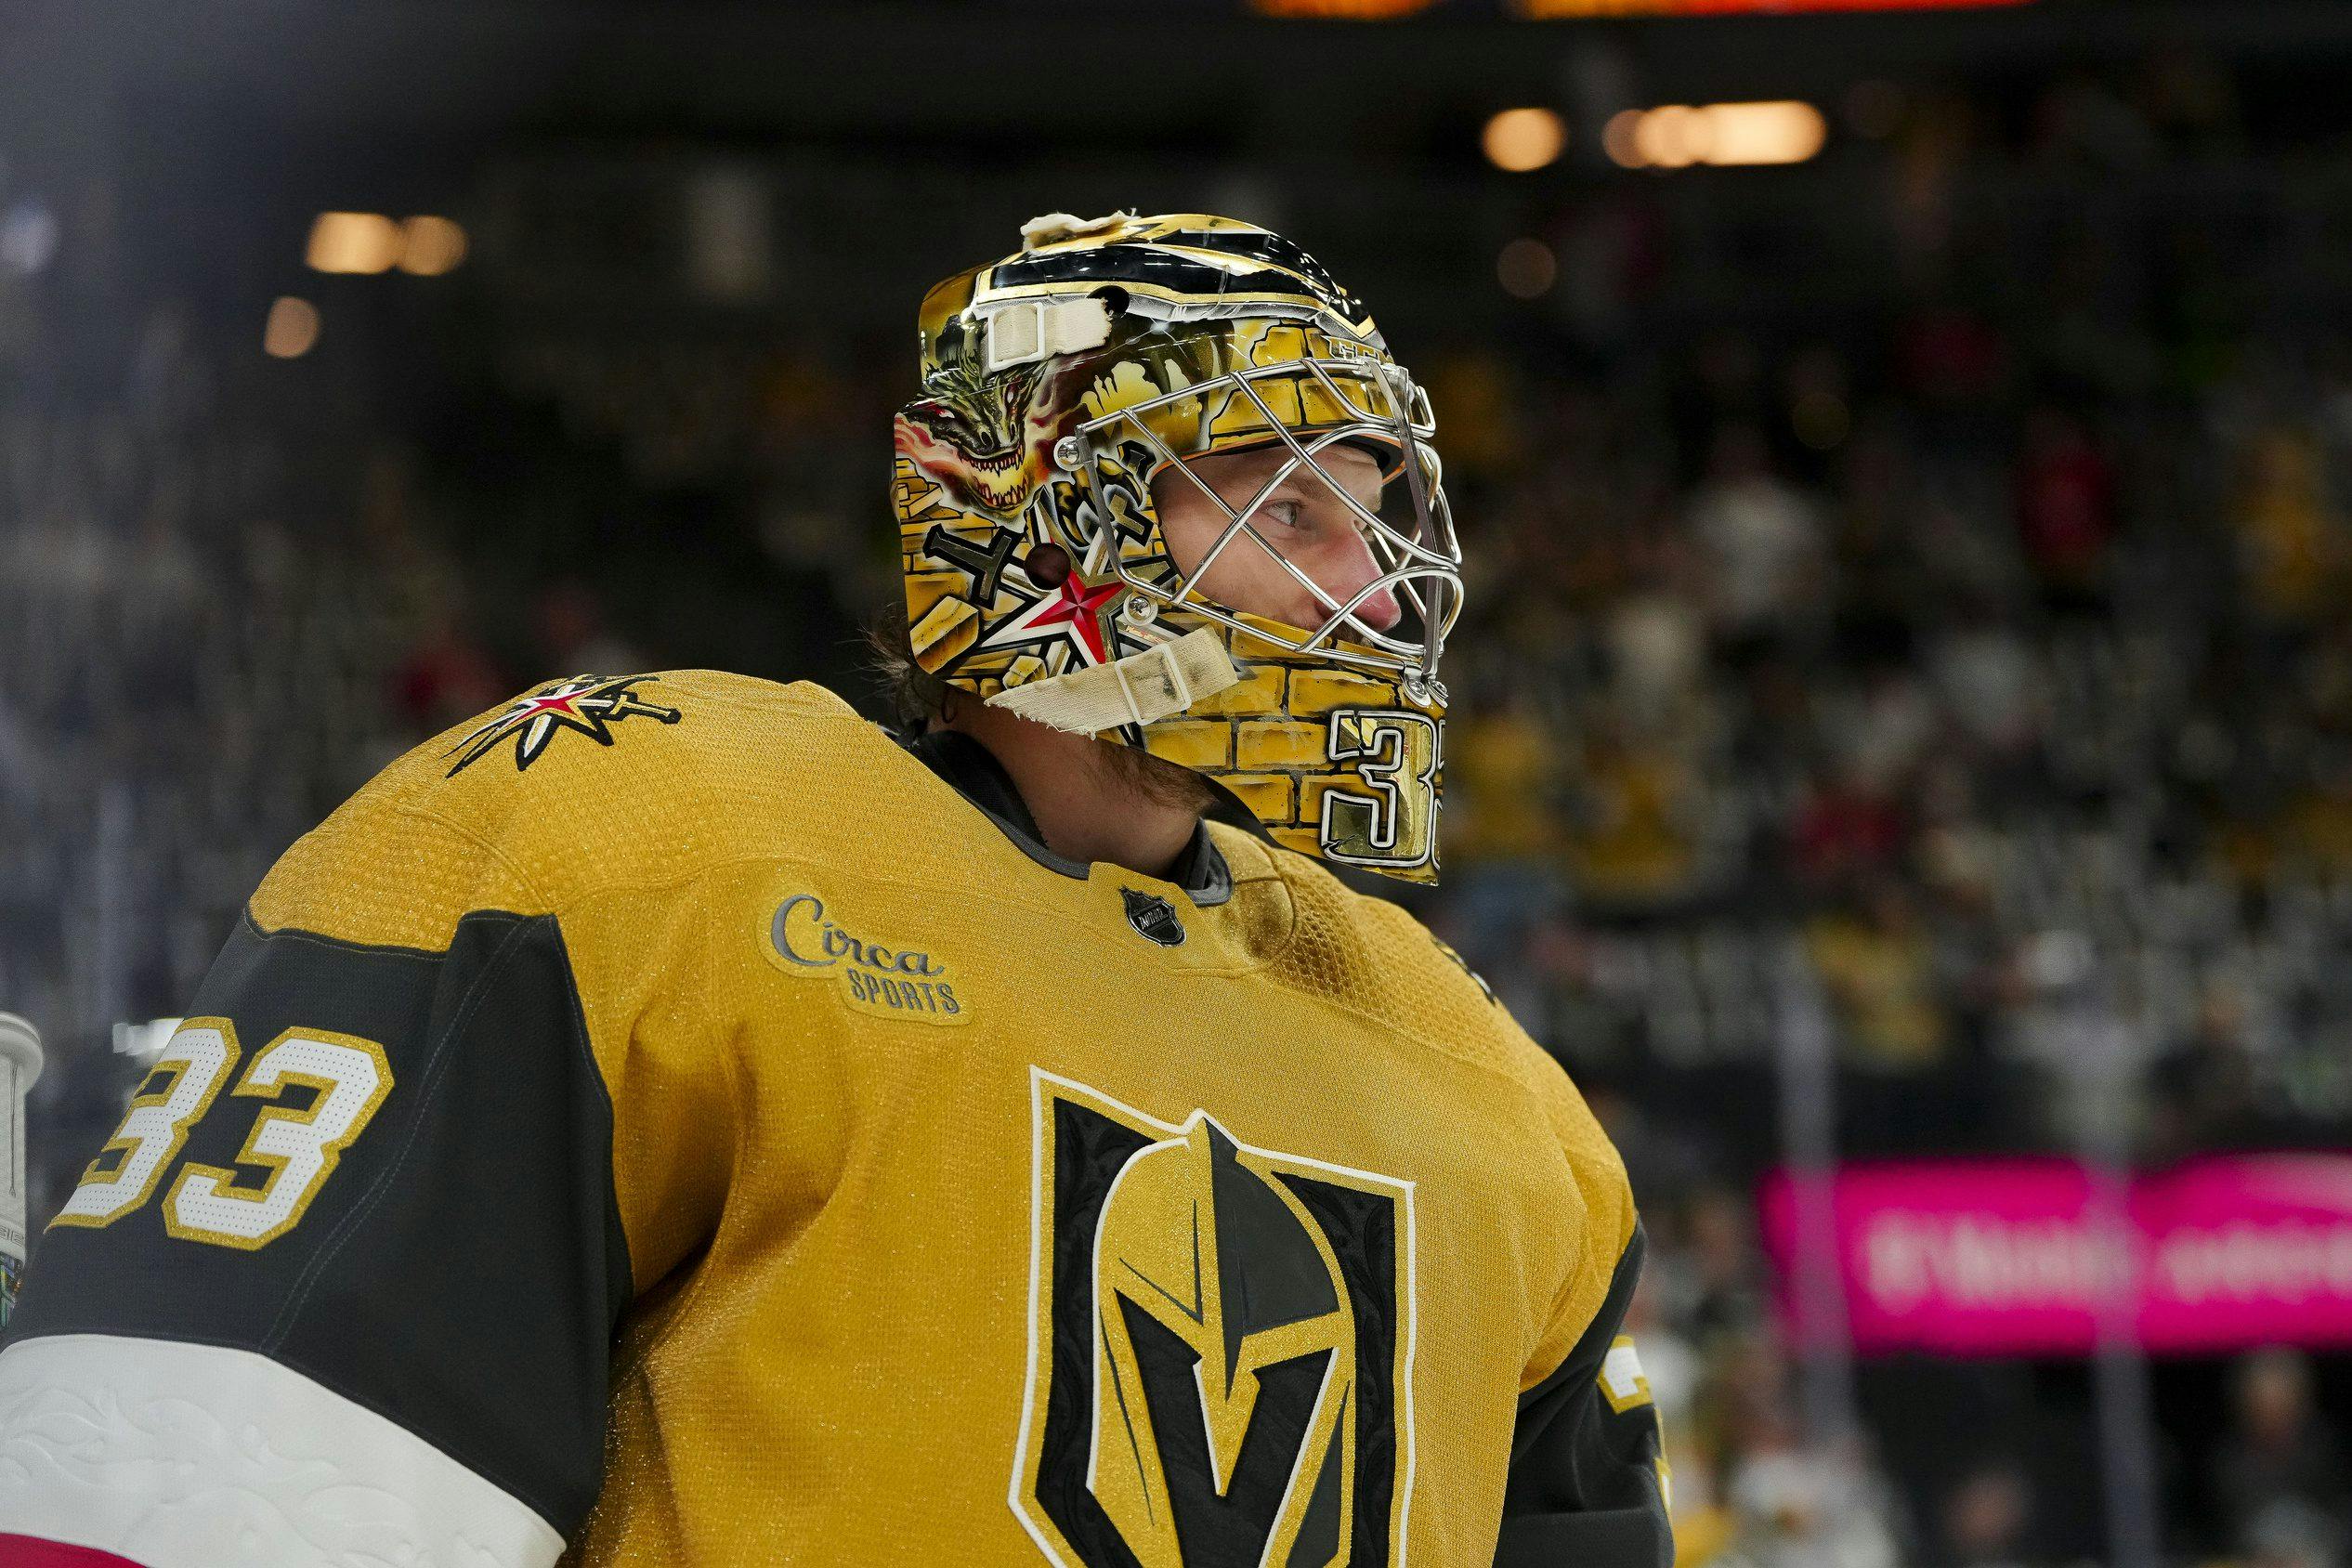 Betway starting goalie bet of the day: Bet on Jake Oettinger to face an  onslaught against the Vegas Golden Knights in game five - Daily Faceoff